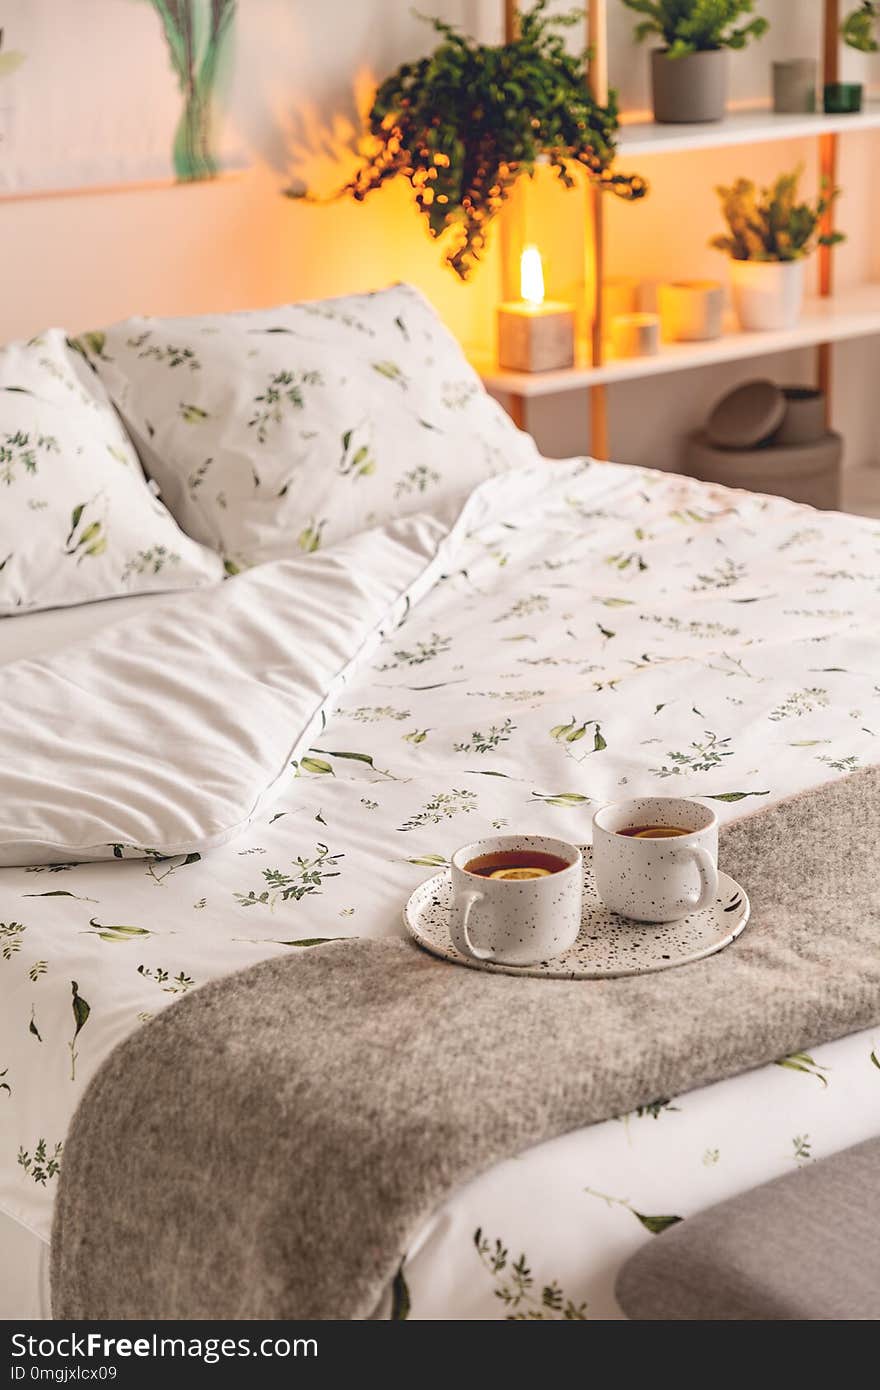 A mood created by a night lamp standing beside a bed dressed in green plants on white pattern linen and pillows in a natural style bedroom interior. Cups of tee served on the bed. Real photo